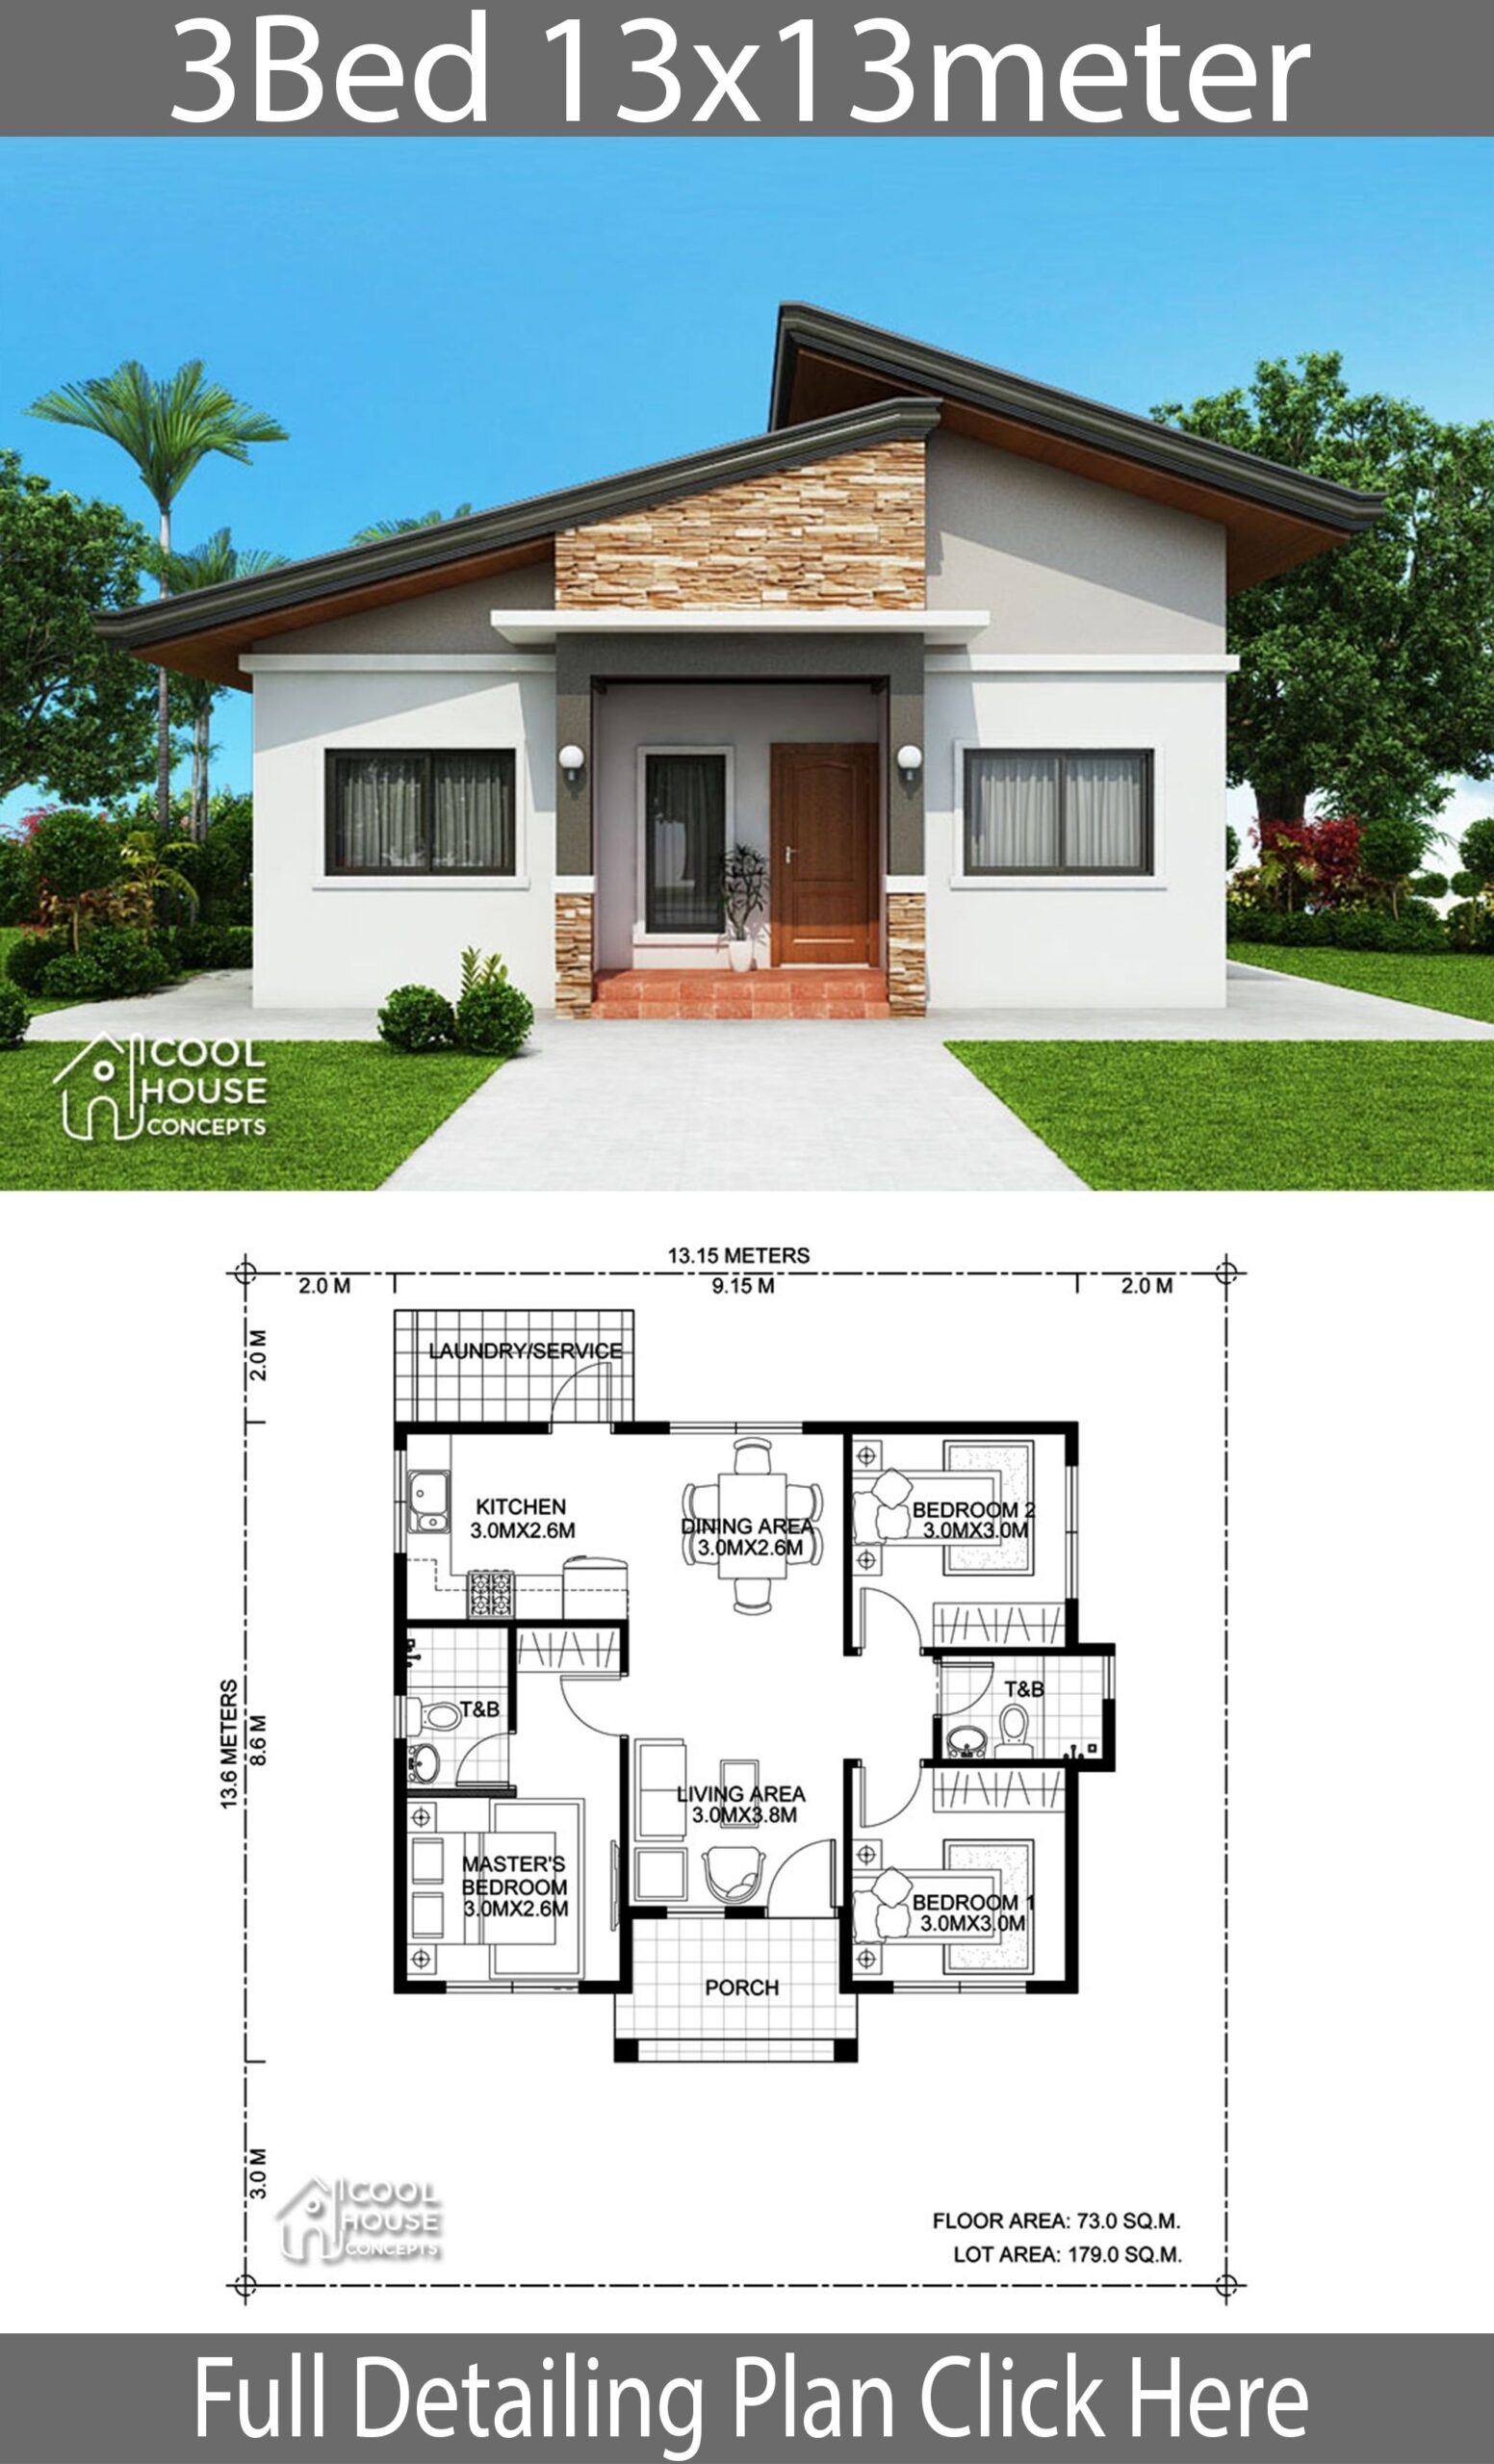 Outstanding pinlee huls on samphoas house plan | modern bungalow house, modern in simple house designs 6 bedrooms